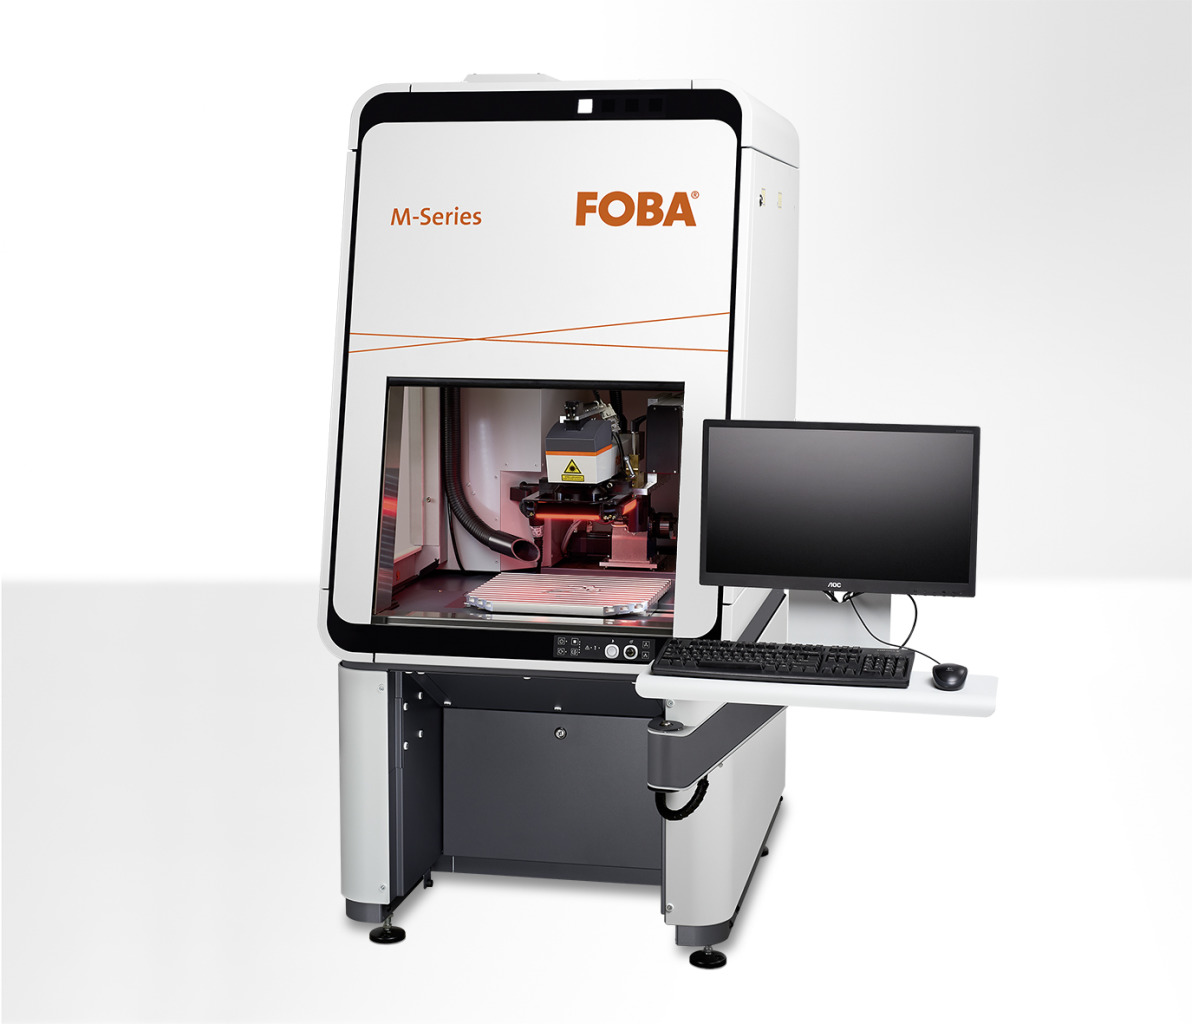 Reduced Cost, Higher Speed and Improved Usability with FOBA MarkUS Laser Marking Software Update